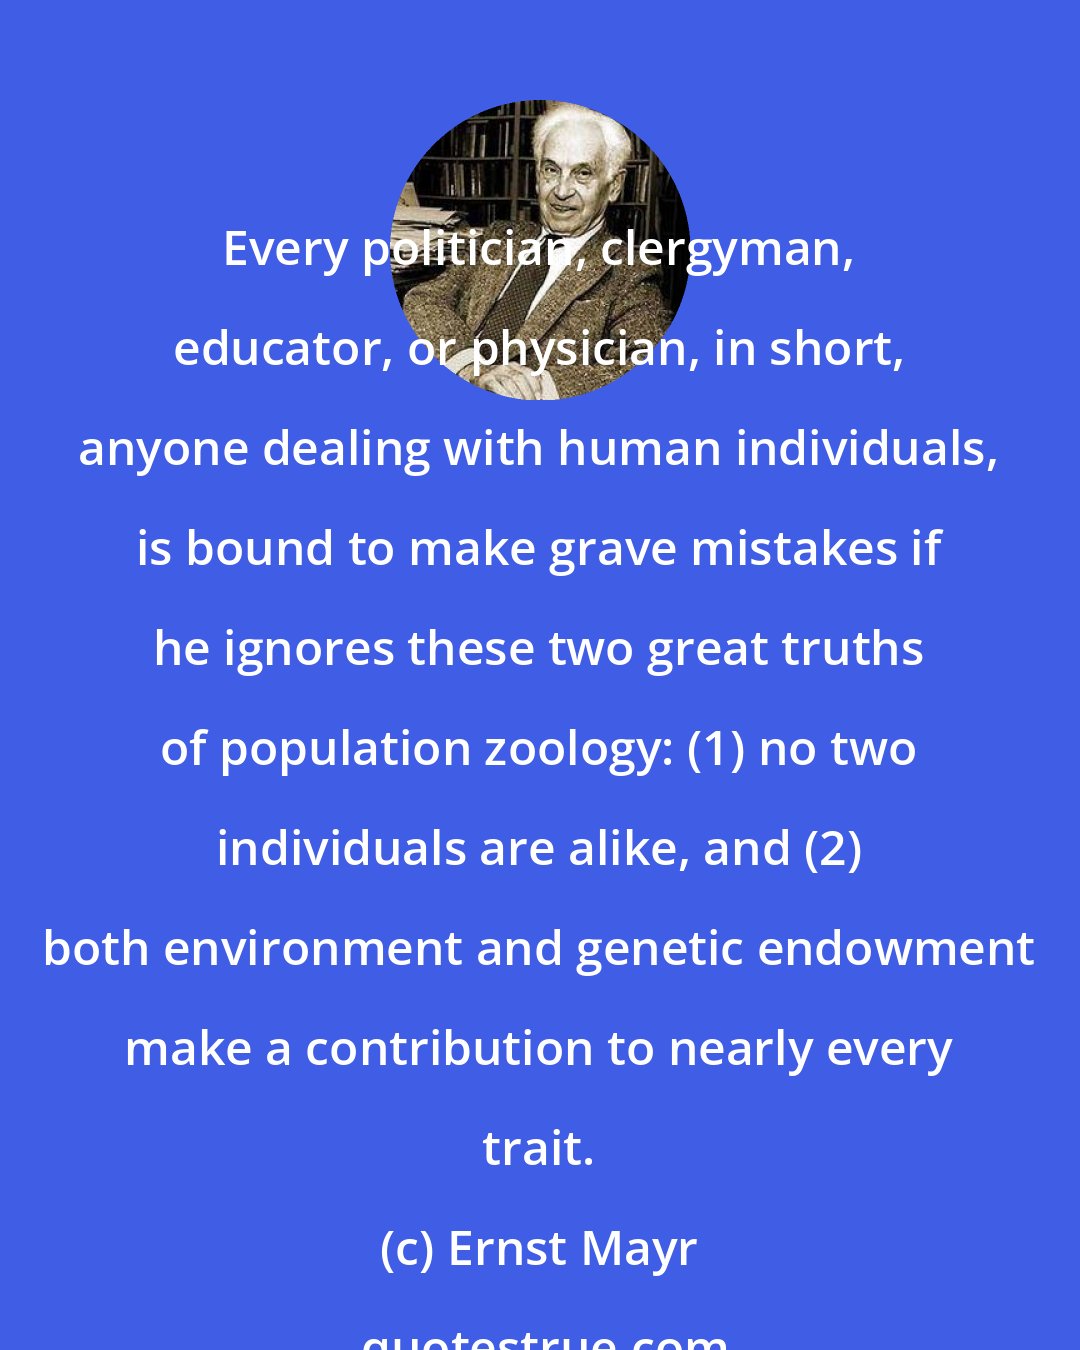 Ernst Mayr: Every politician, clergyman, educator, or physician, in short, anyone dealing with human individuals, is bound to make grave mistakes if he ignores these two great truths of population zoology: (1) no two individuals are alike, and (2) both environment and genetic endowment make a contribution to nearly every trait.